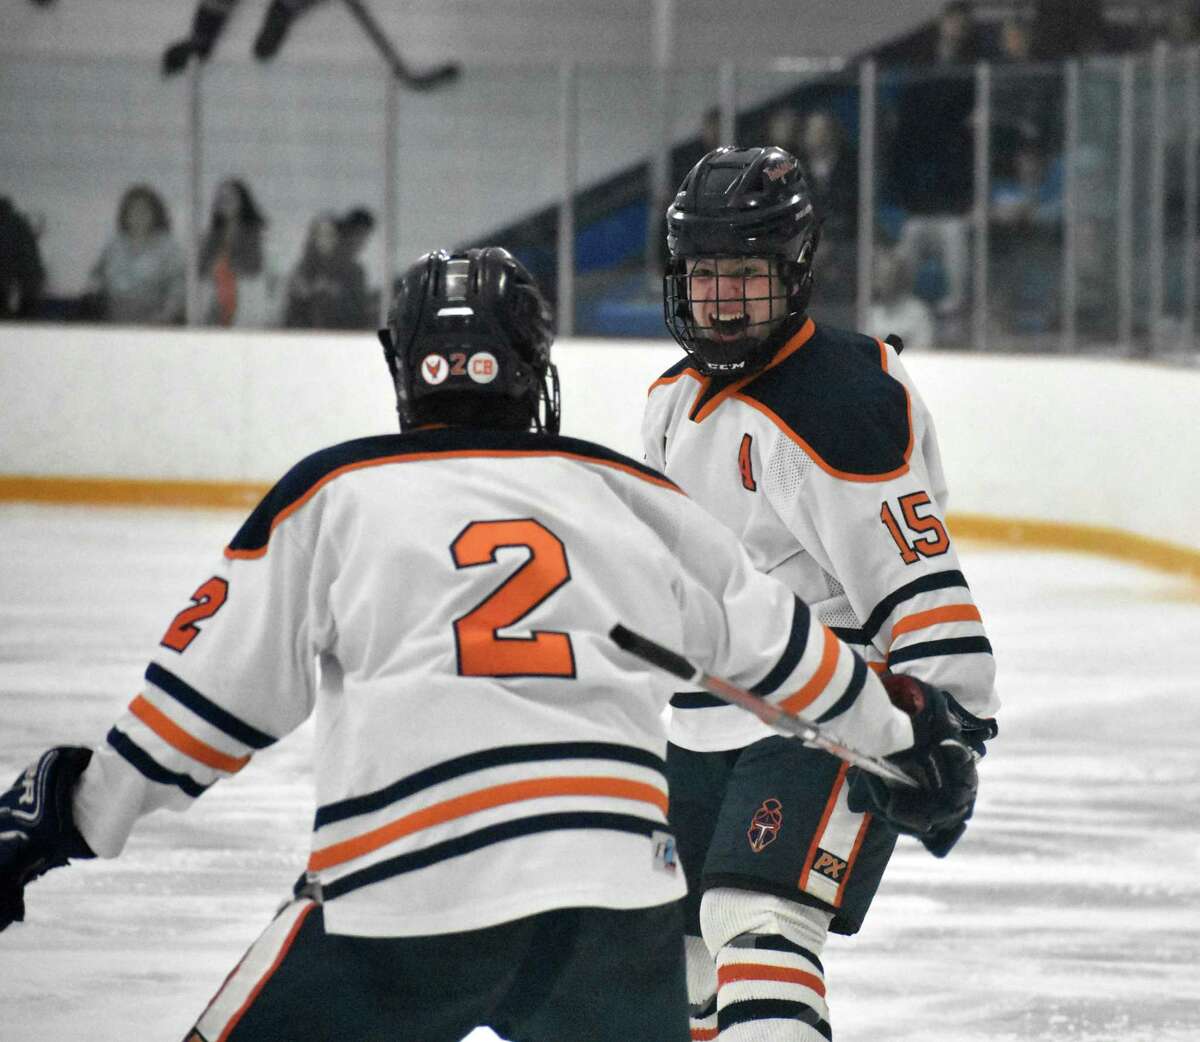 Lyman Hall’s Dan Pettit celebrates his goal with brother Zach Pettit during the CIAC Division II semifinals against Wethersfield on Tuesday at Bennett Rink in West Haven.